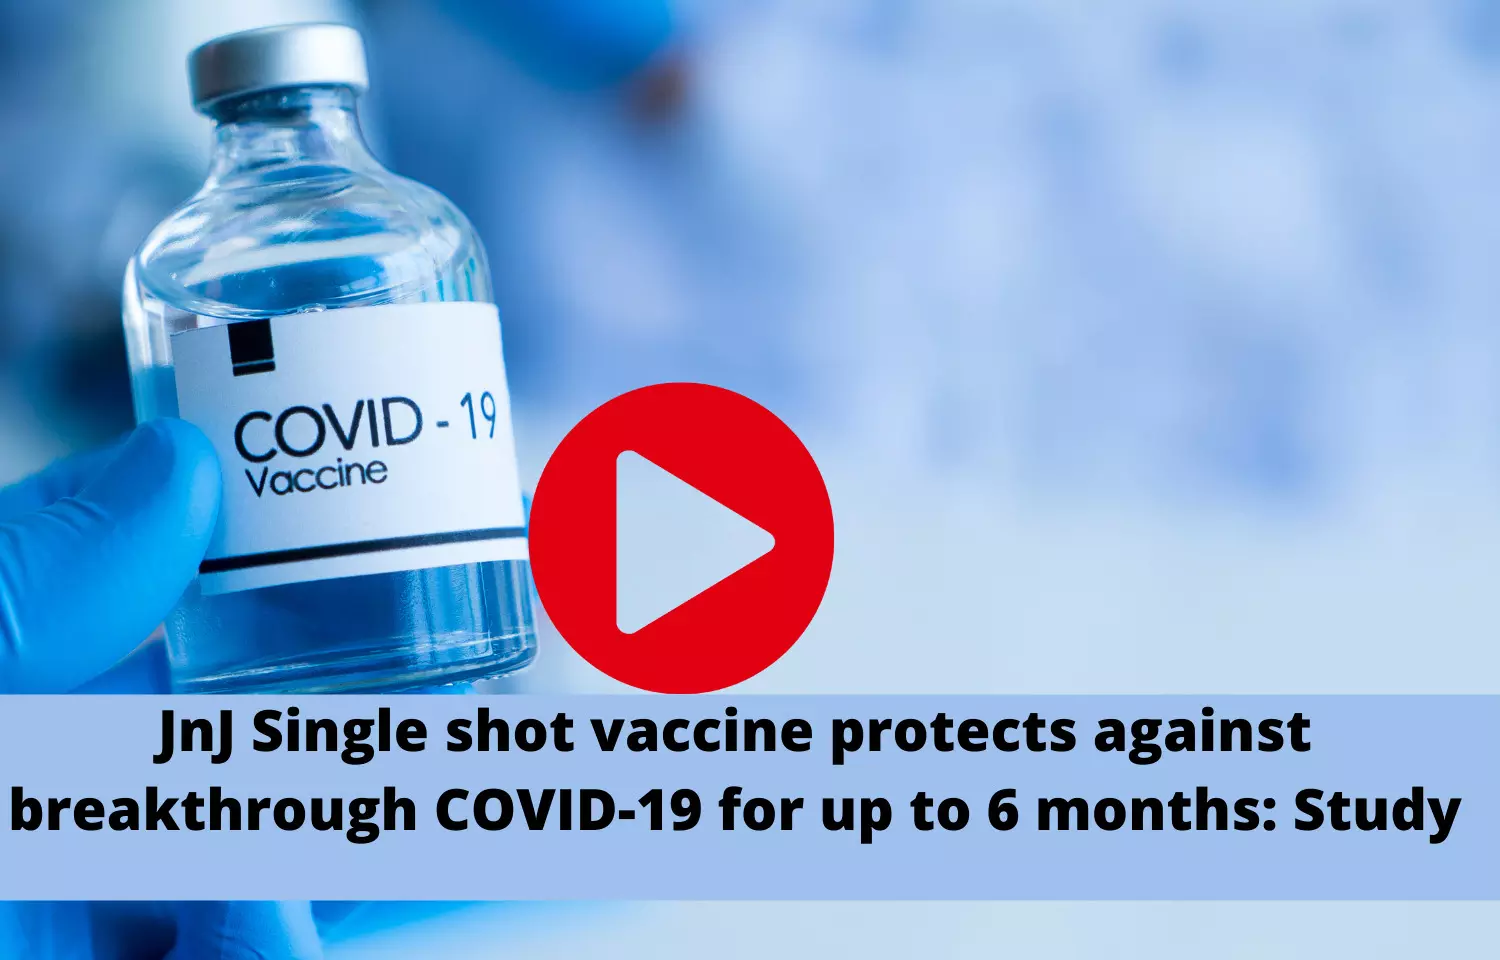 JnJ Single shot vaccine protects against breakthrough COVID-19 for up to 6 months: Study